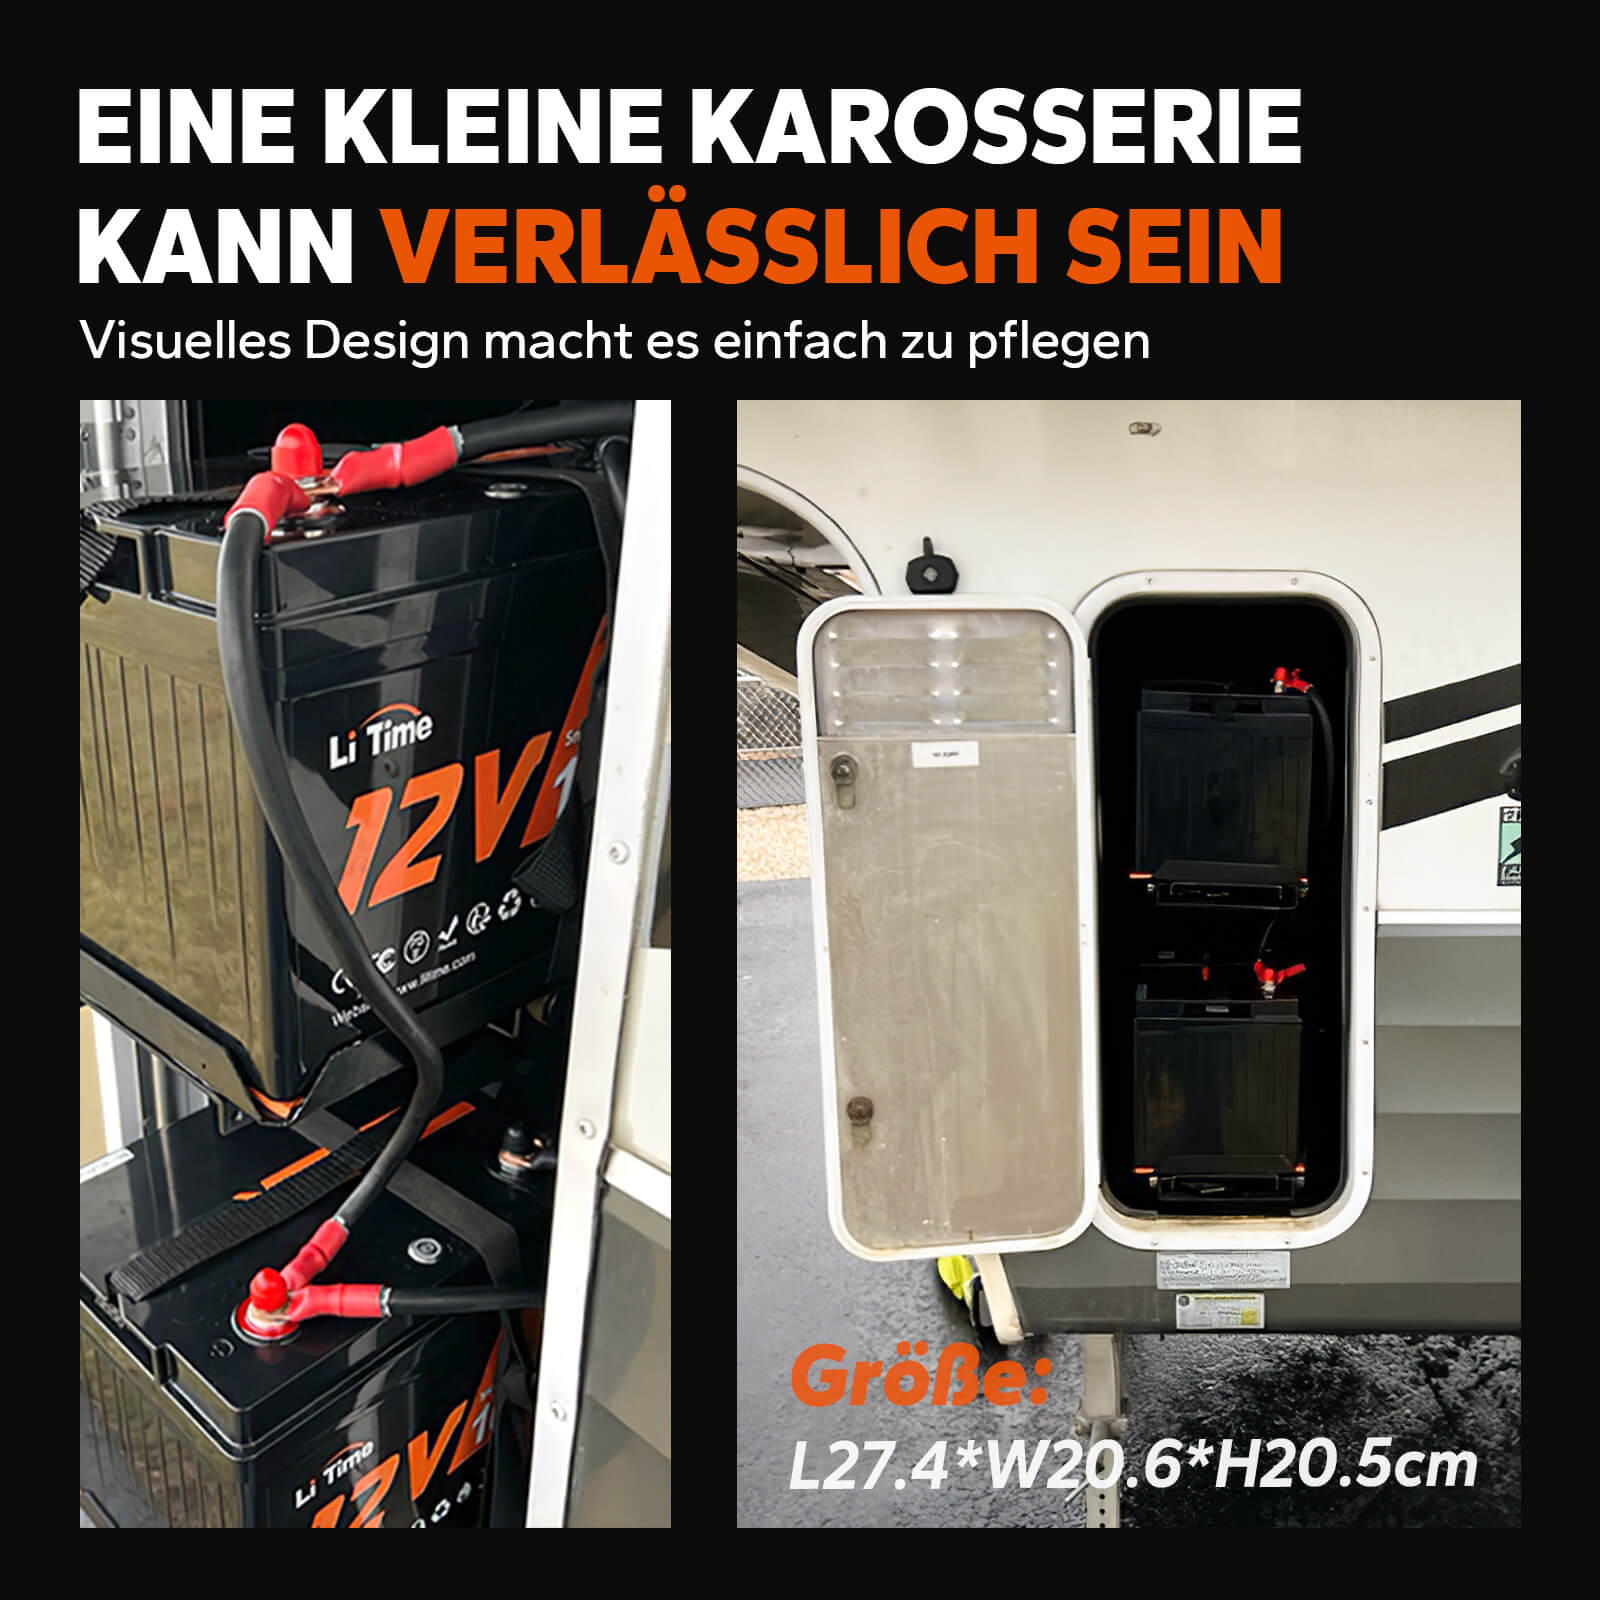 【0% VAT】LiTime 12V 100Ah Smart Lithium LiFePO4 battery (ONLY for residential buildings and ONLY in DEU - Only for customers in Germany)